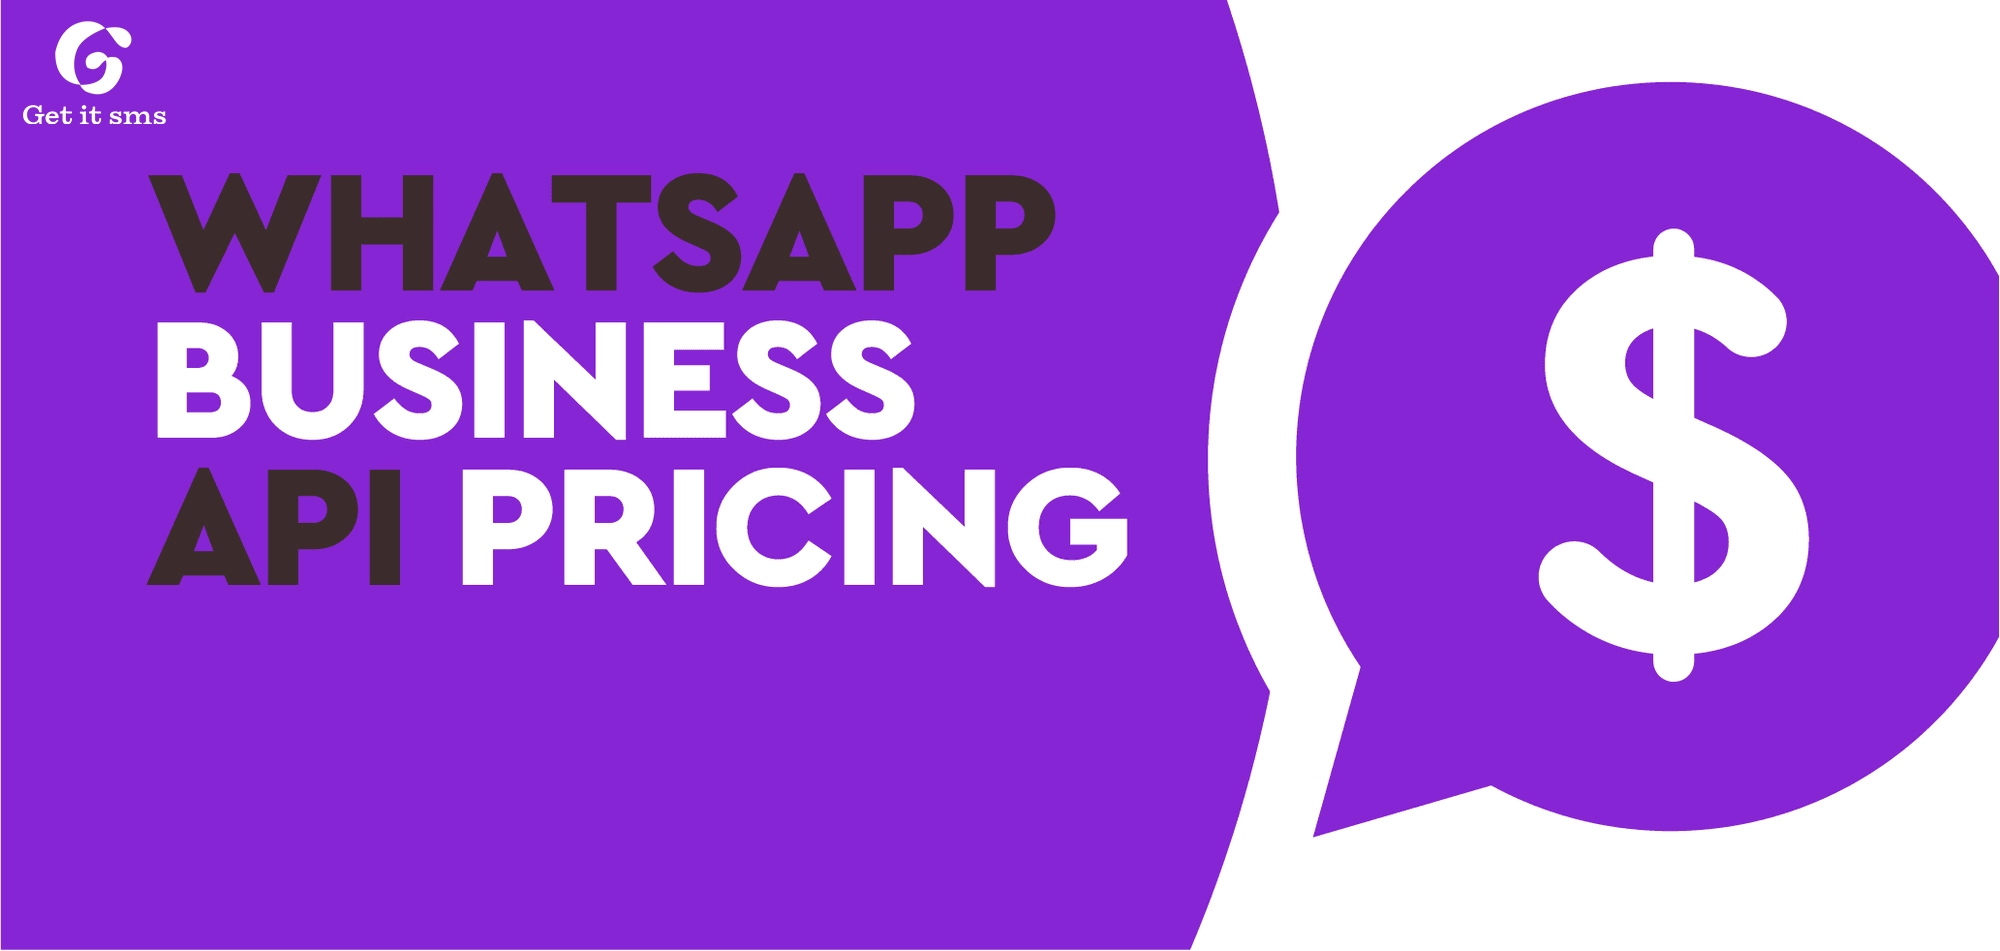 What Is “WhatsApp Business API Pricing”?